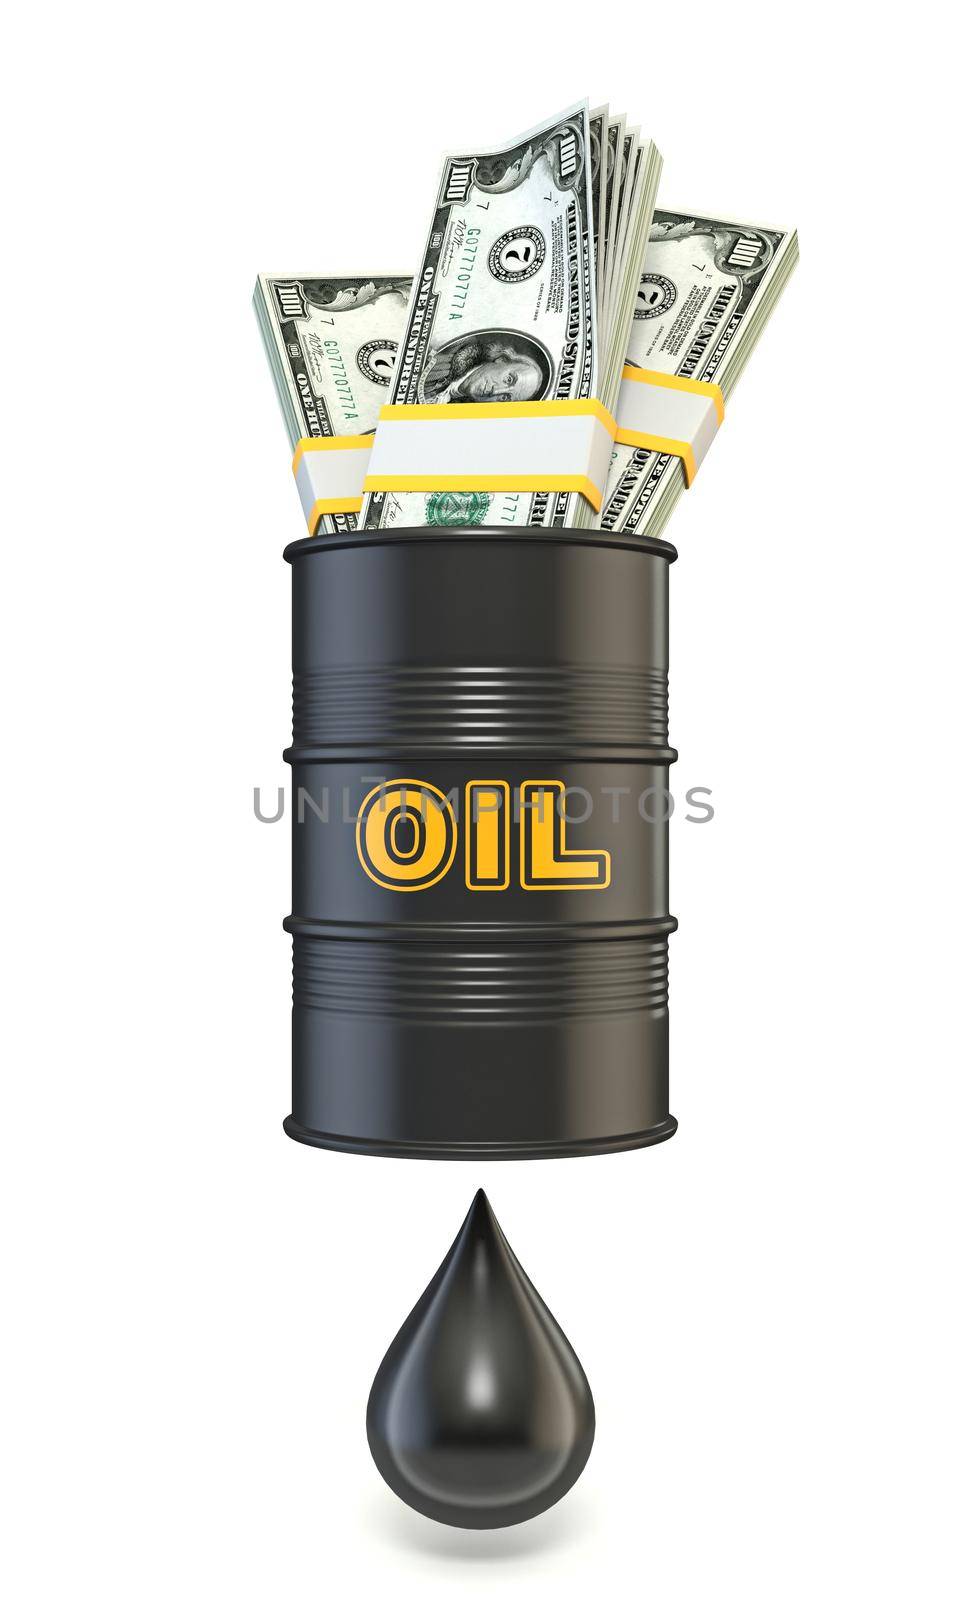 Oil barrel full of Dollars banknotes produce one oil drop 3D rendering illustration isolated on white background